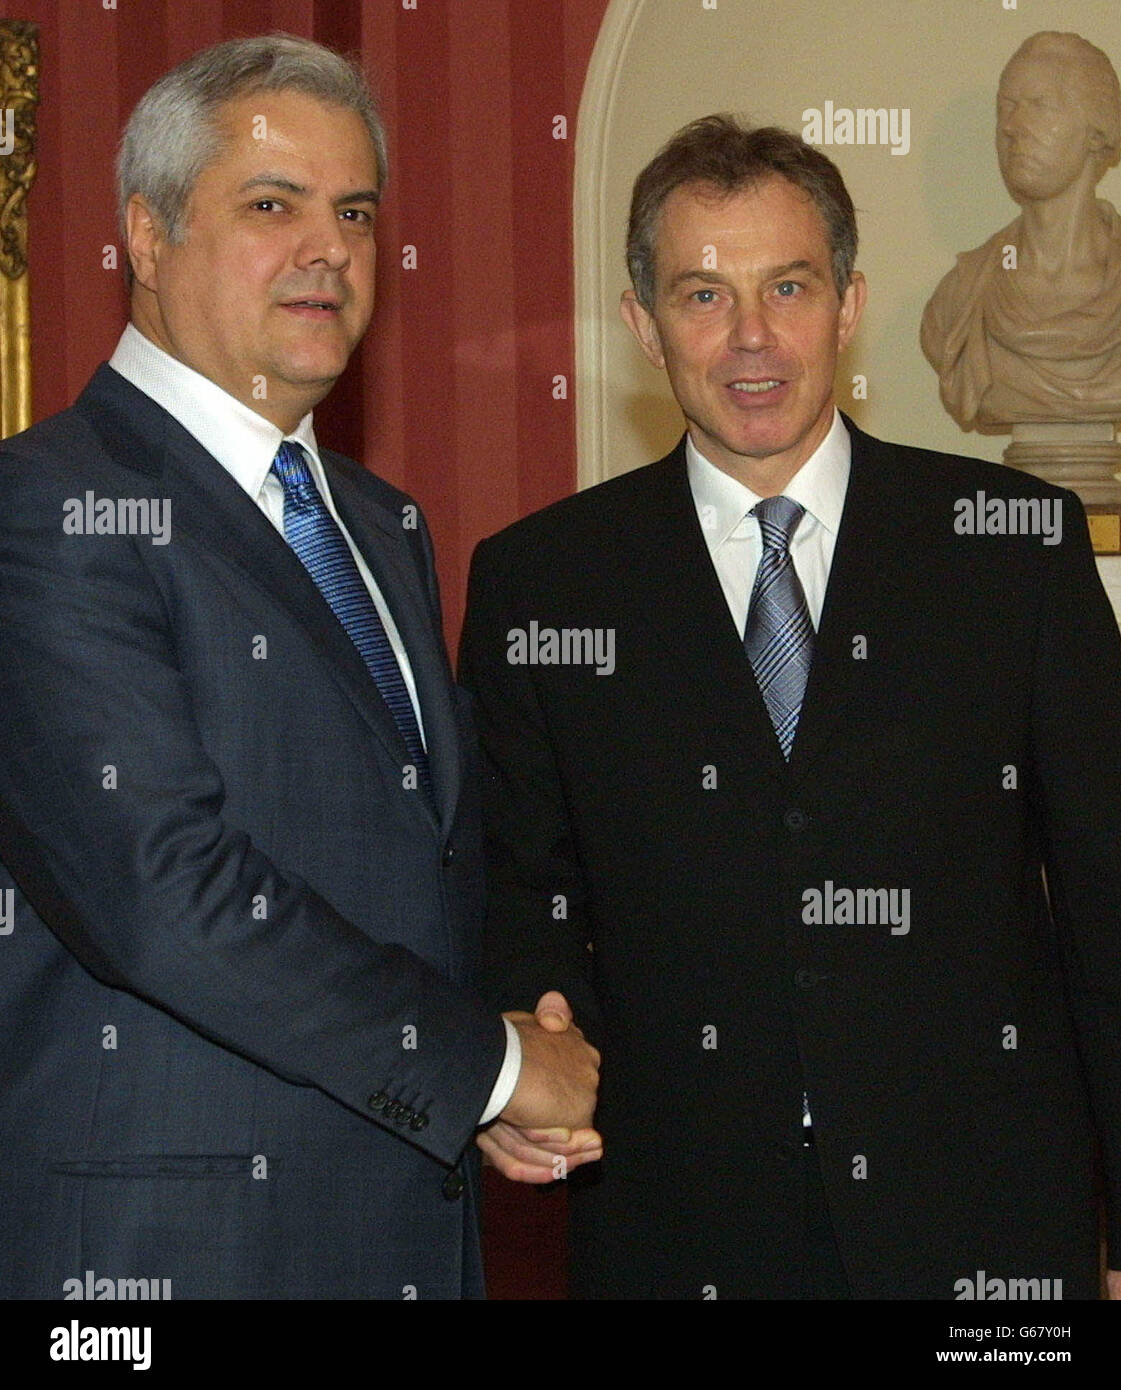 Britain's Prime Minister Tony Blair (right) greets the Romanian Prime Minister Adrian Nastase, at No.10 Downing Street, London. * Mr Blair today warned France and Russia that pledging to veto a second resolution on Iraq would let Saddam Hussein off the hook. 04/04/04: Blair was drawn into the furious political row over immigration amid claims that he struck an agreement with the prime minister of Romania to relax controls on migrants from his country coming into Britain. According to a report in The Sunday Telegraph, Mr Blair promised Nastase he would lift all visa requirements for Romanians Stock Photo